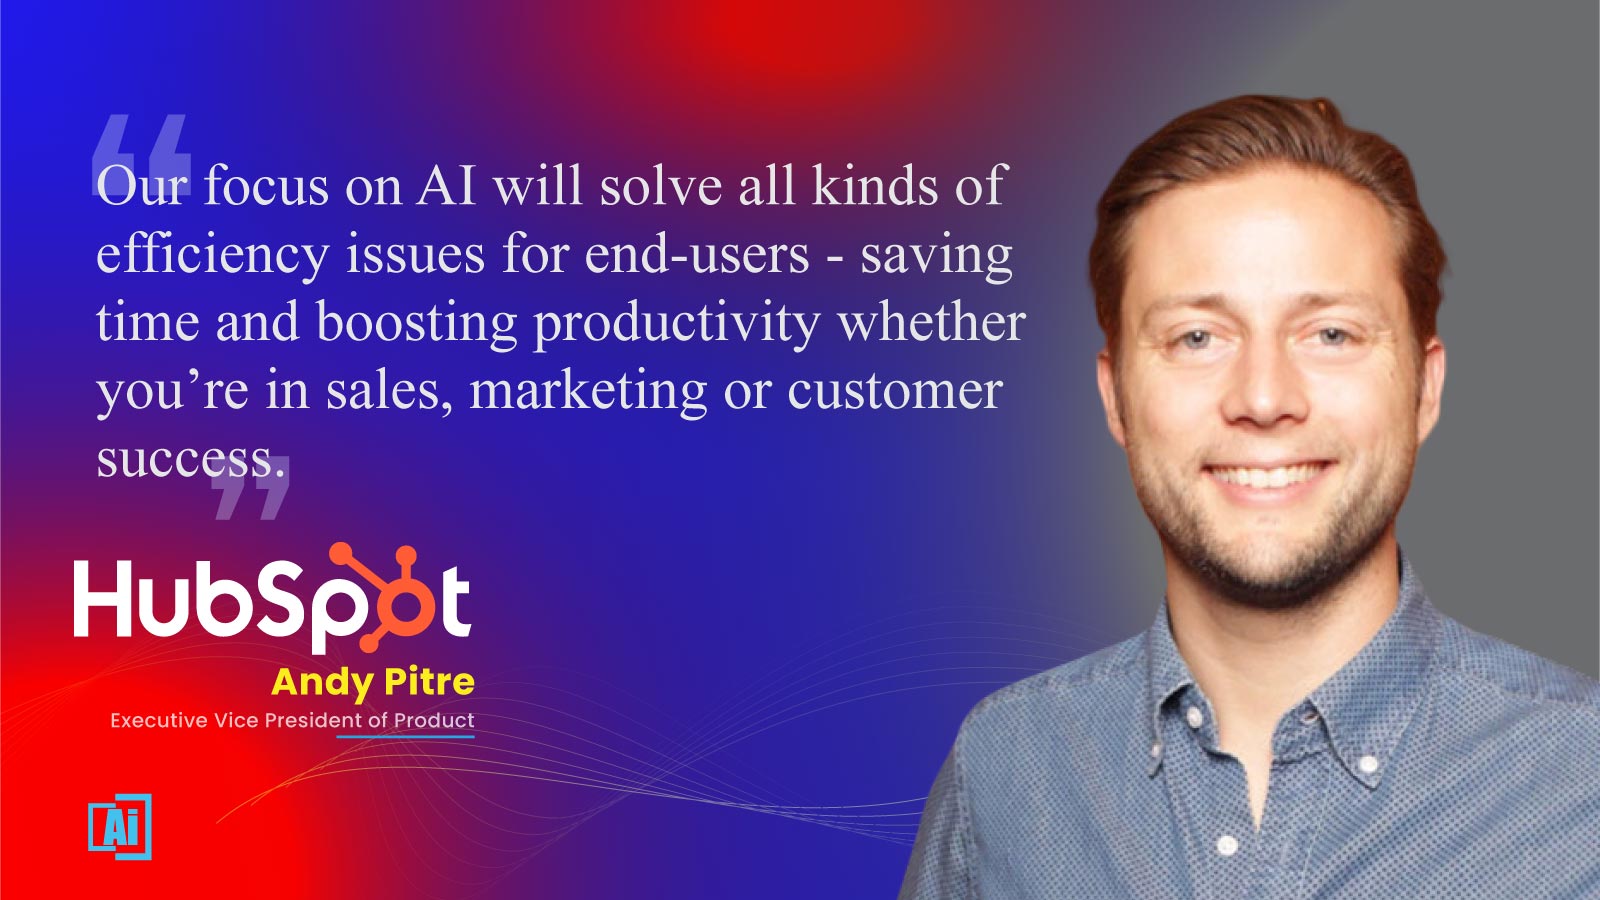 Andy Pitre, Executive Vice President of Product at HubSpot